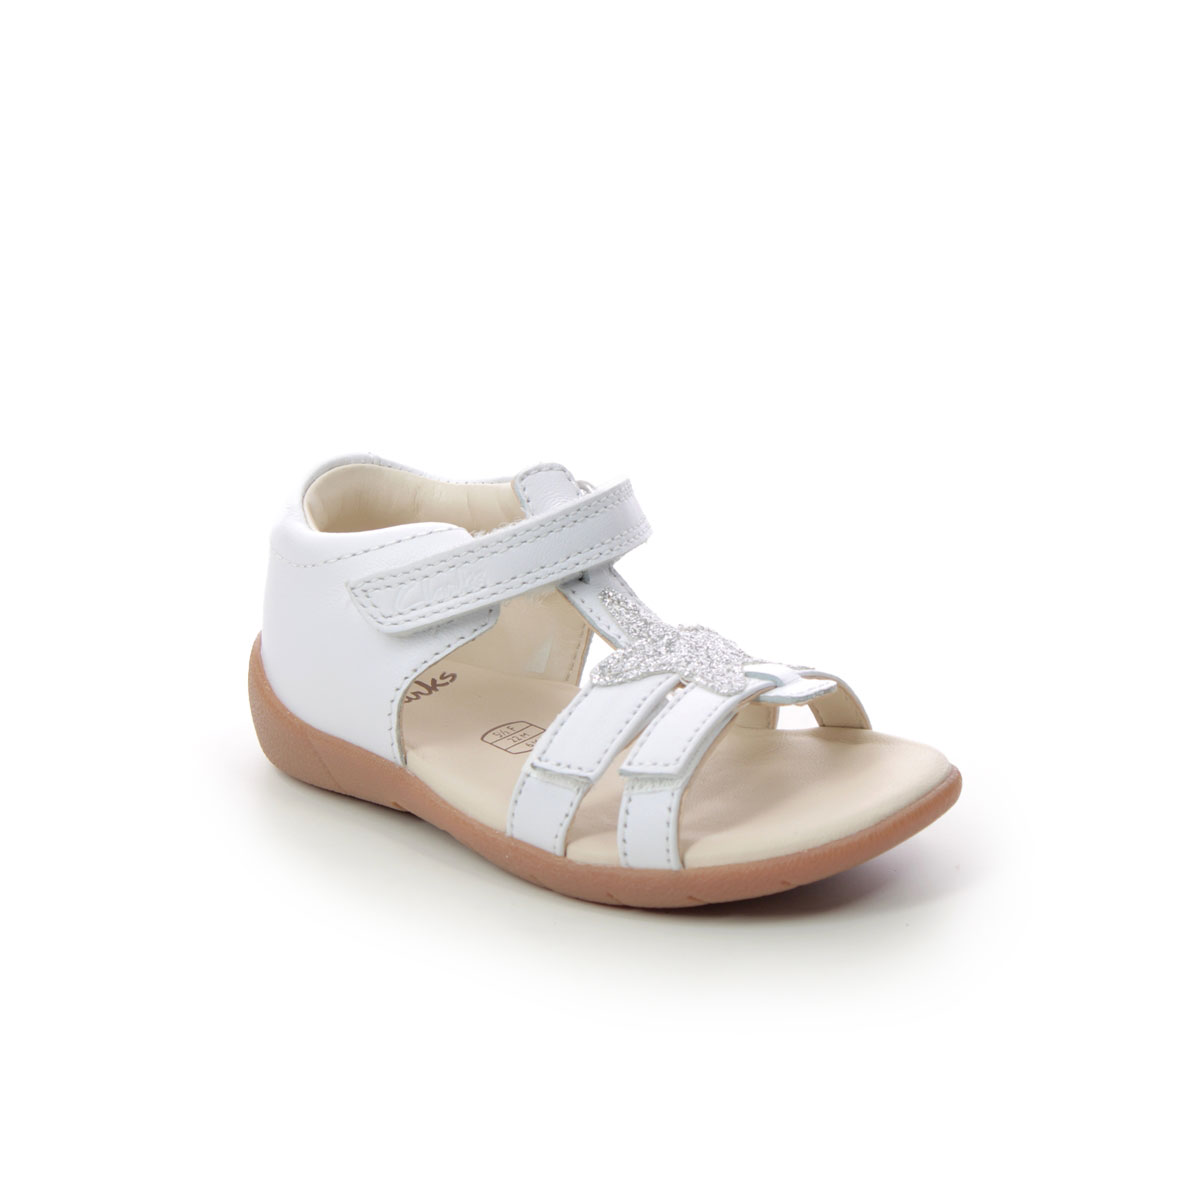 Clarks Zora Summer T White Leather Kids Sandals 566436F In Size 4.5 In Plain White Leather F Width Fitting Regular Fit For kids